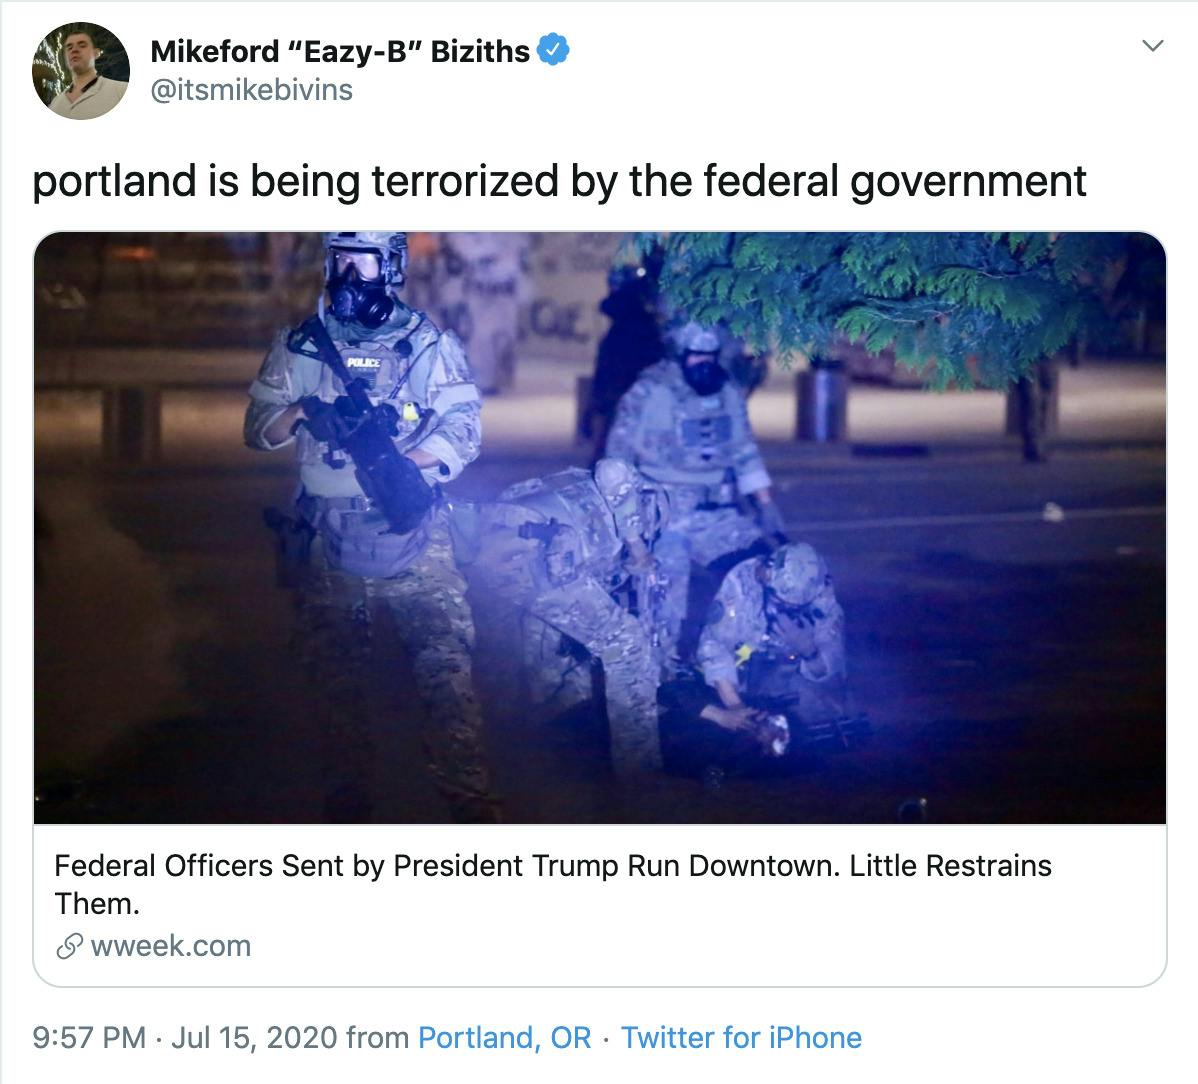 'portland is being terrorized by the federal government' link to an article titled 'Federal officers sent by President Trump run downtown. Little restrains them'